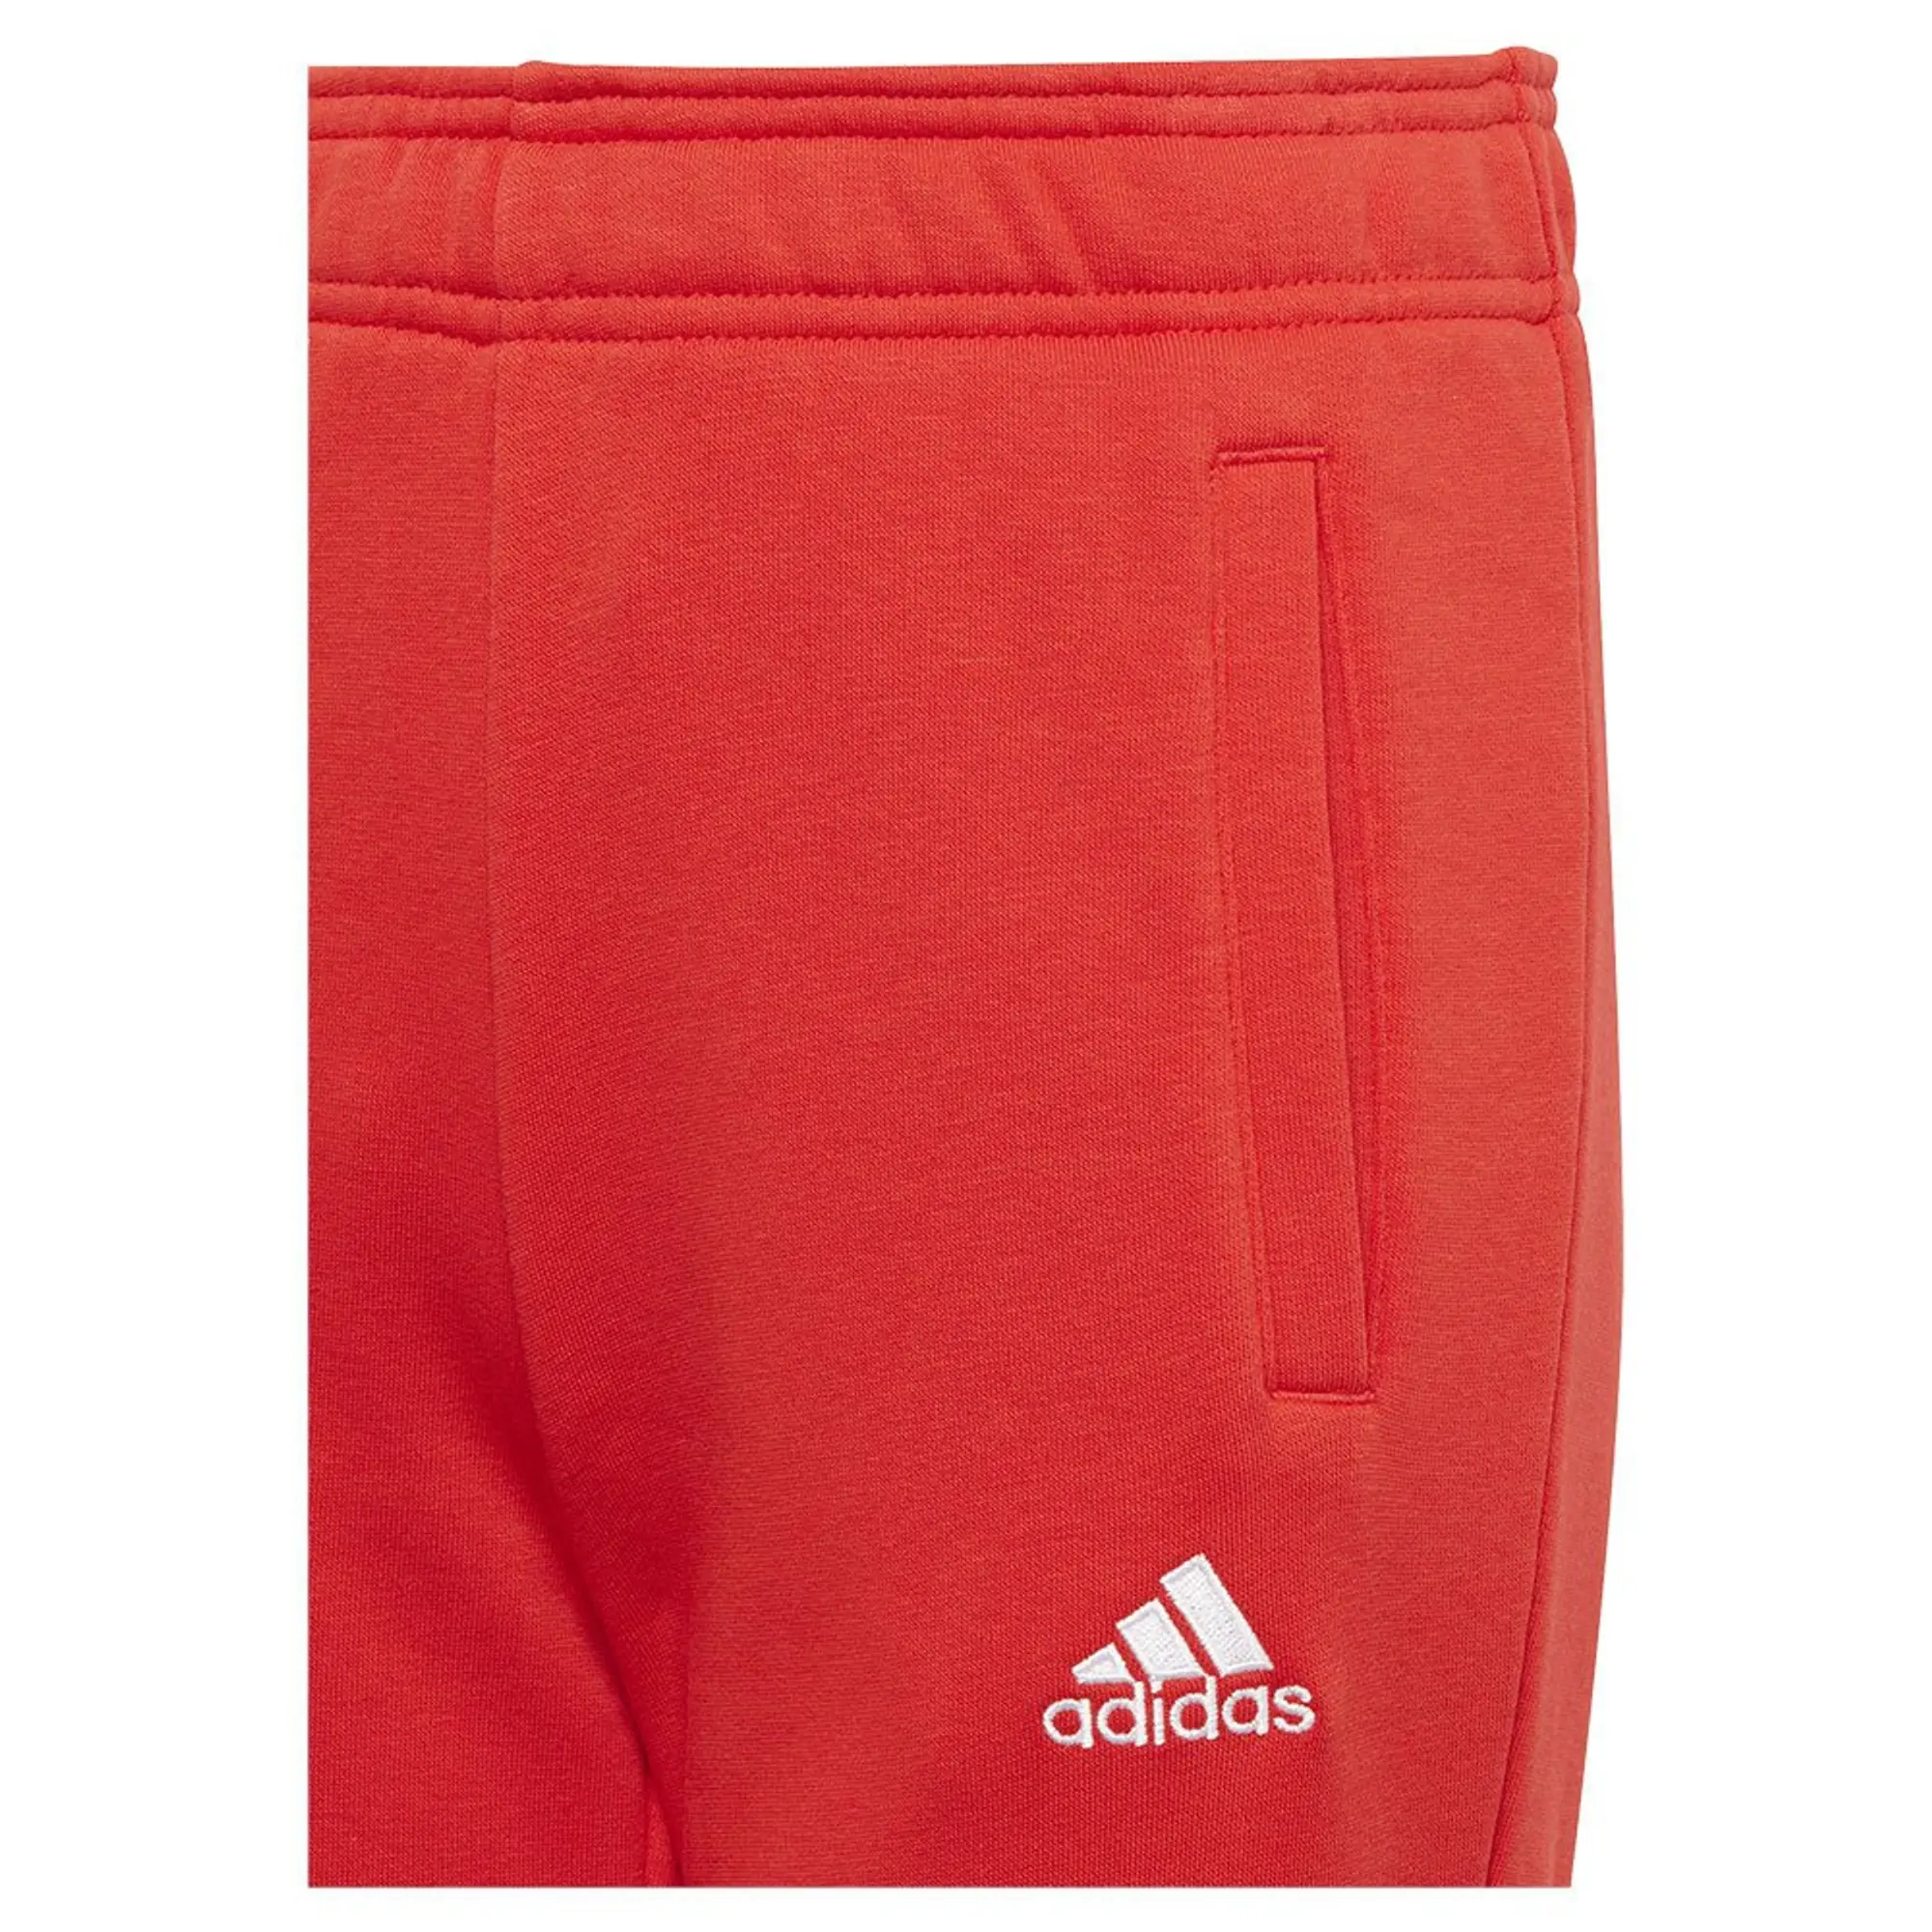 adidas Bayern München Training Trousers - Red Kids - Red